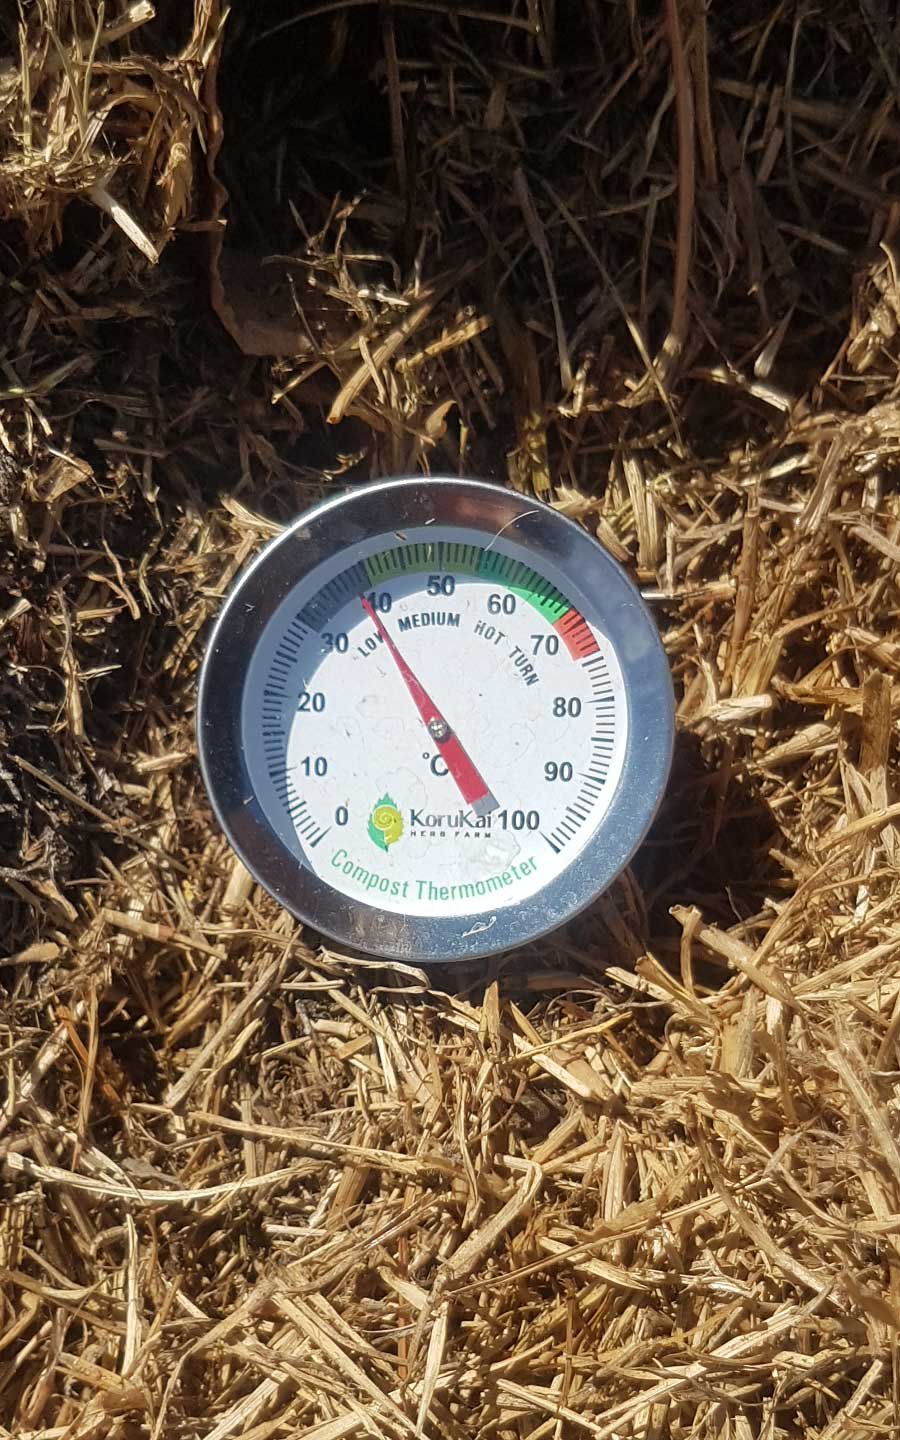 Second thermometer reading on 27 Feb - 38ºC